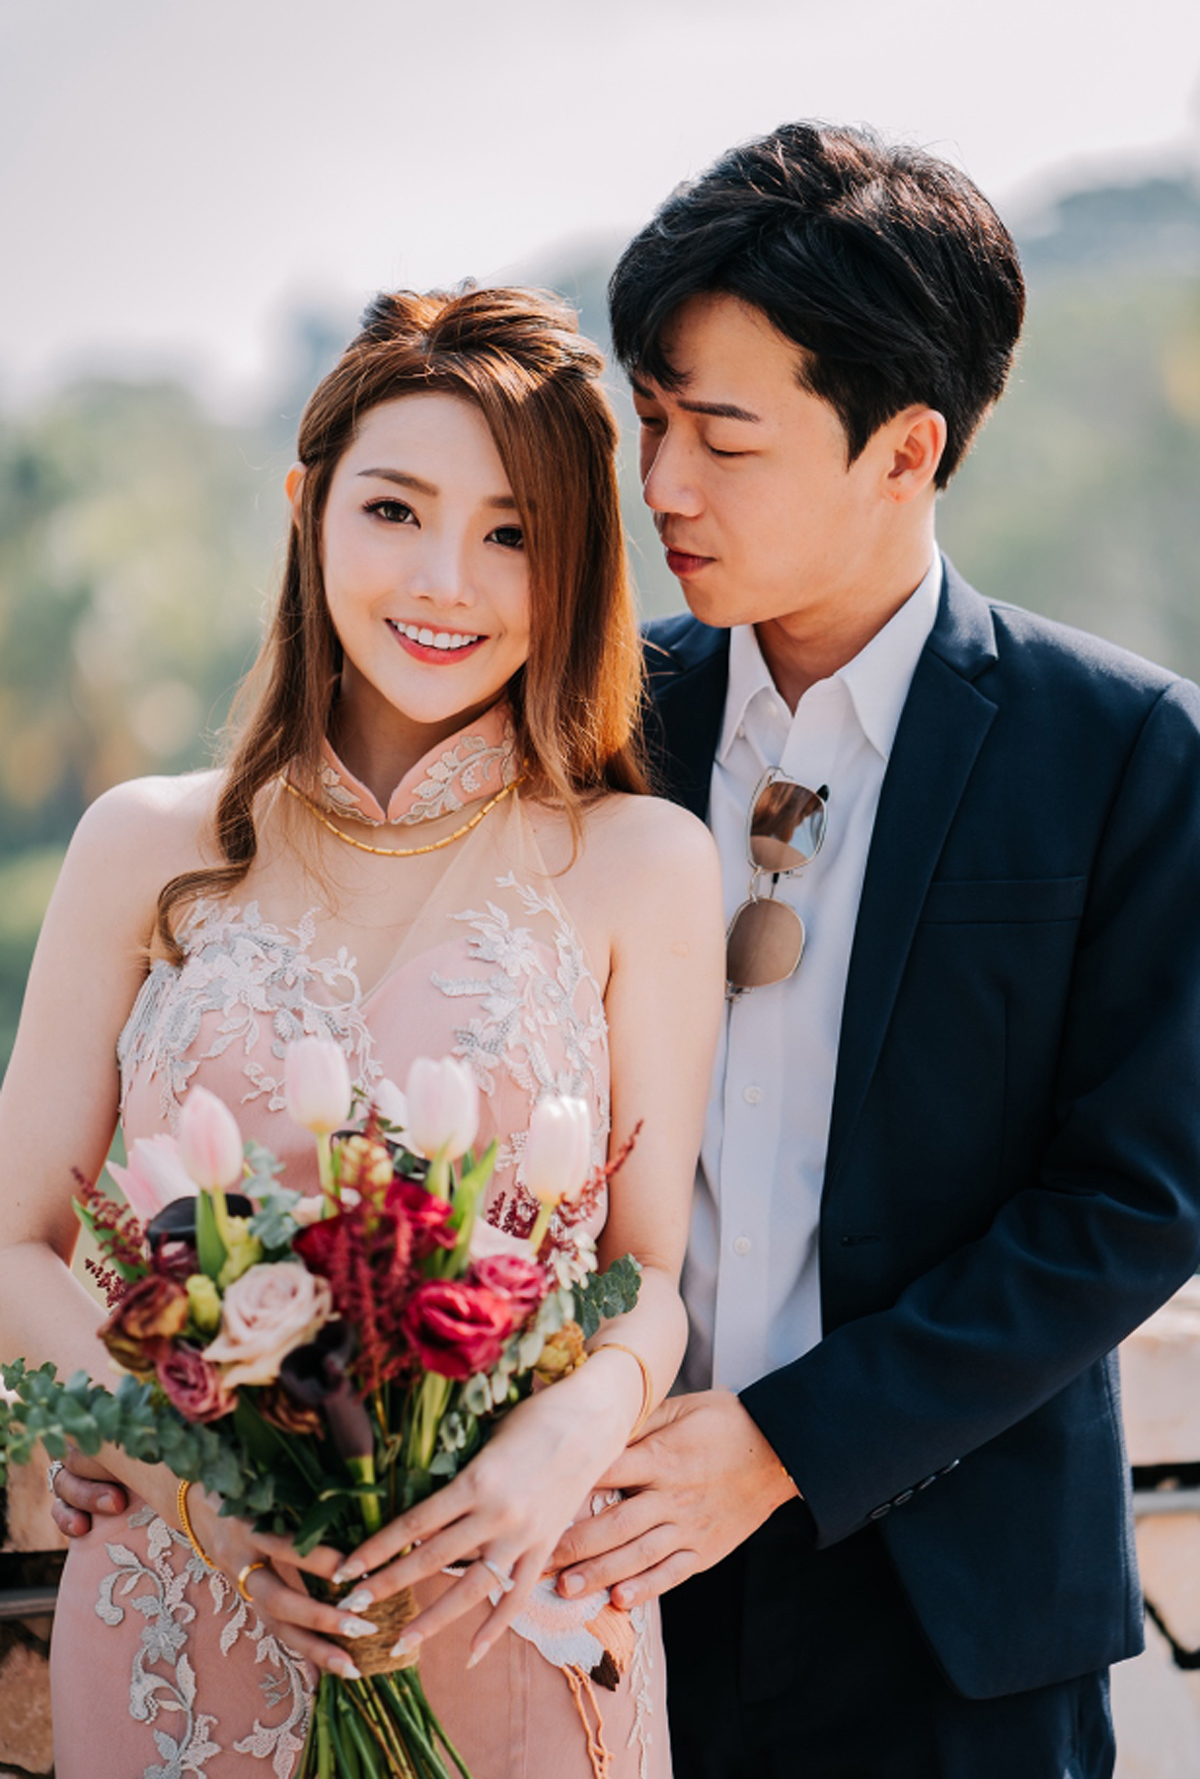 An Insider’s Wedding Scoop: Joanna Soh’s Personal Tips to Nail Your Wedding Day